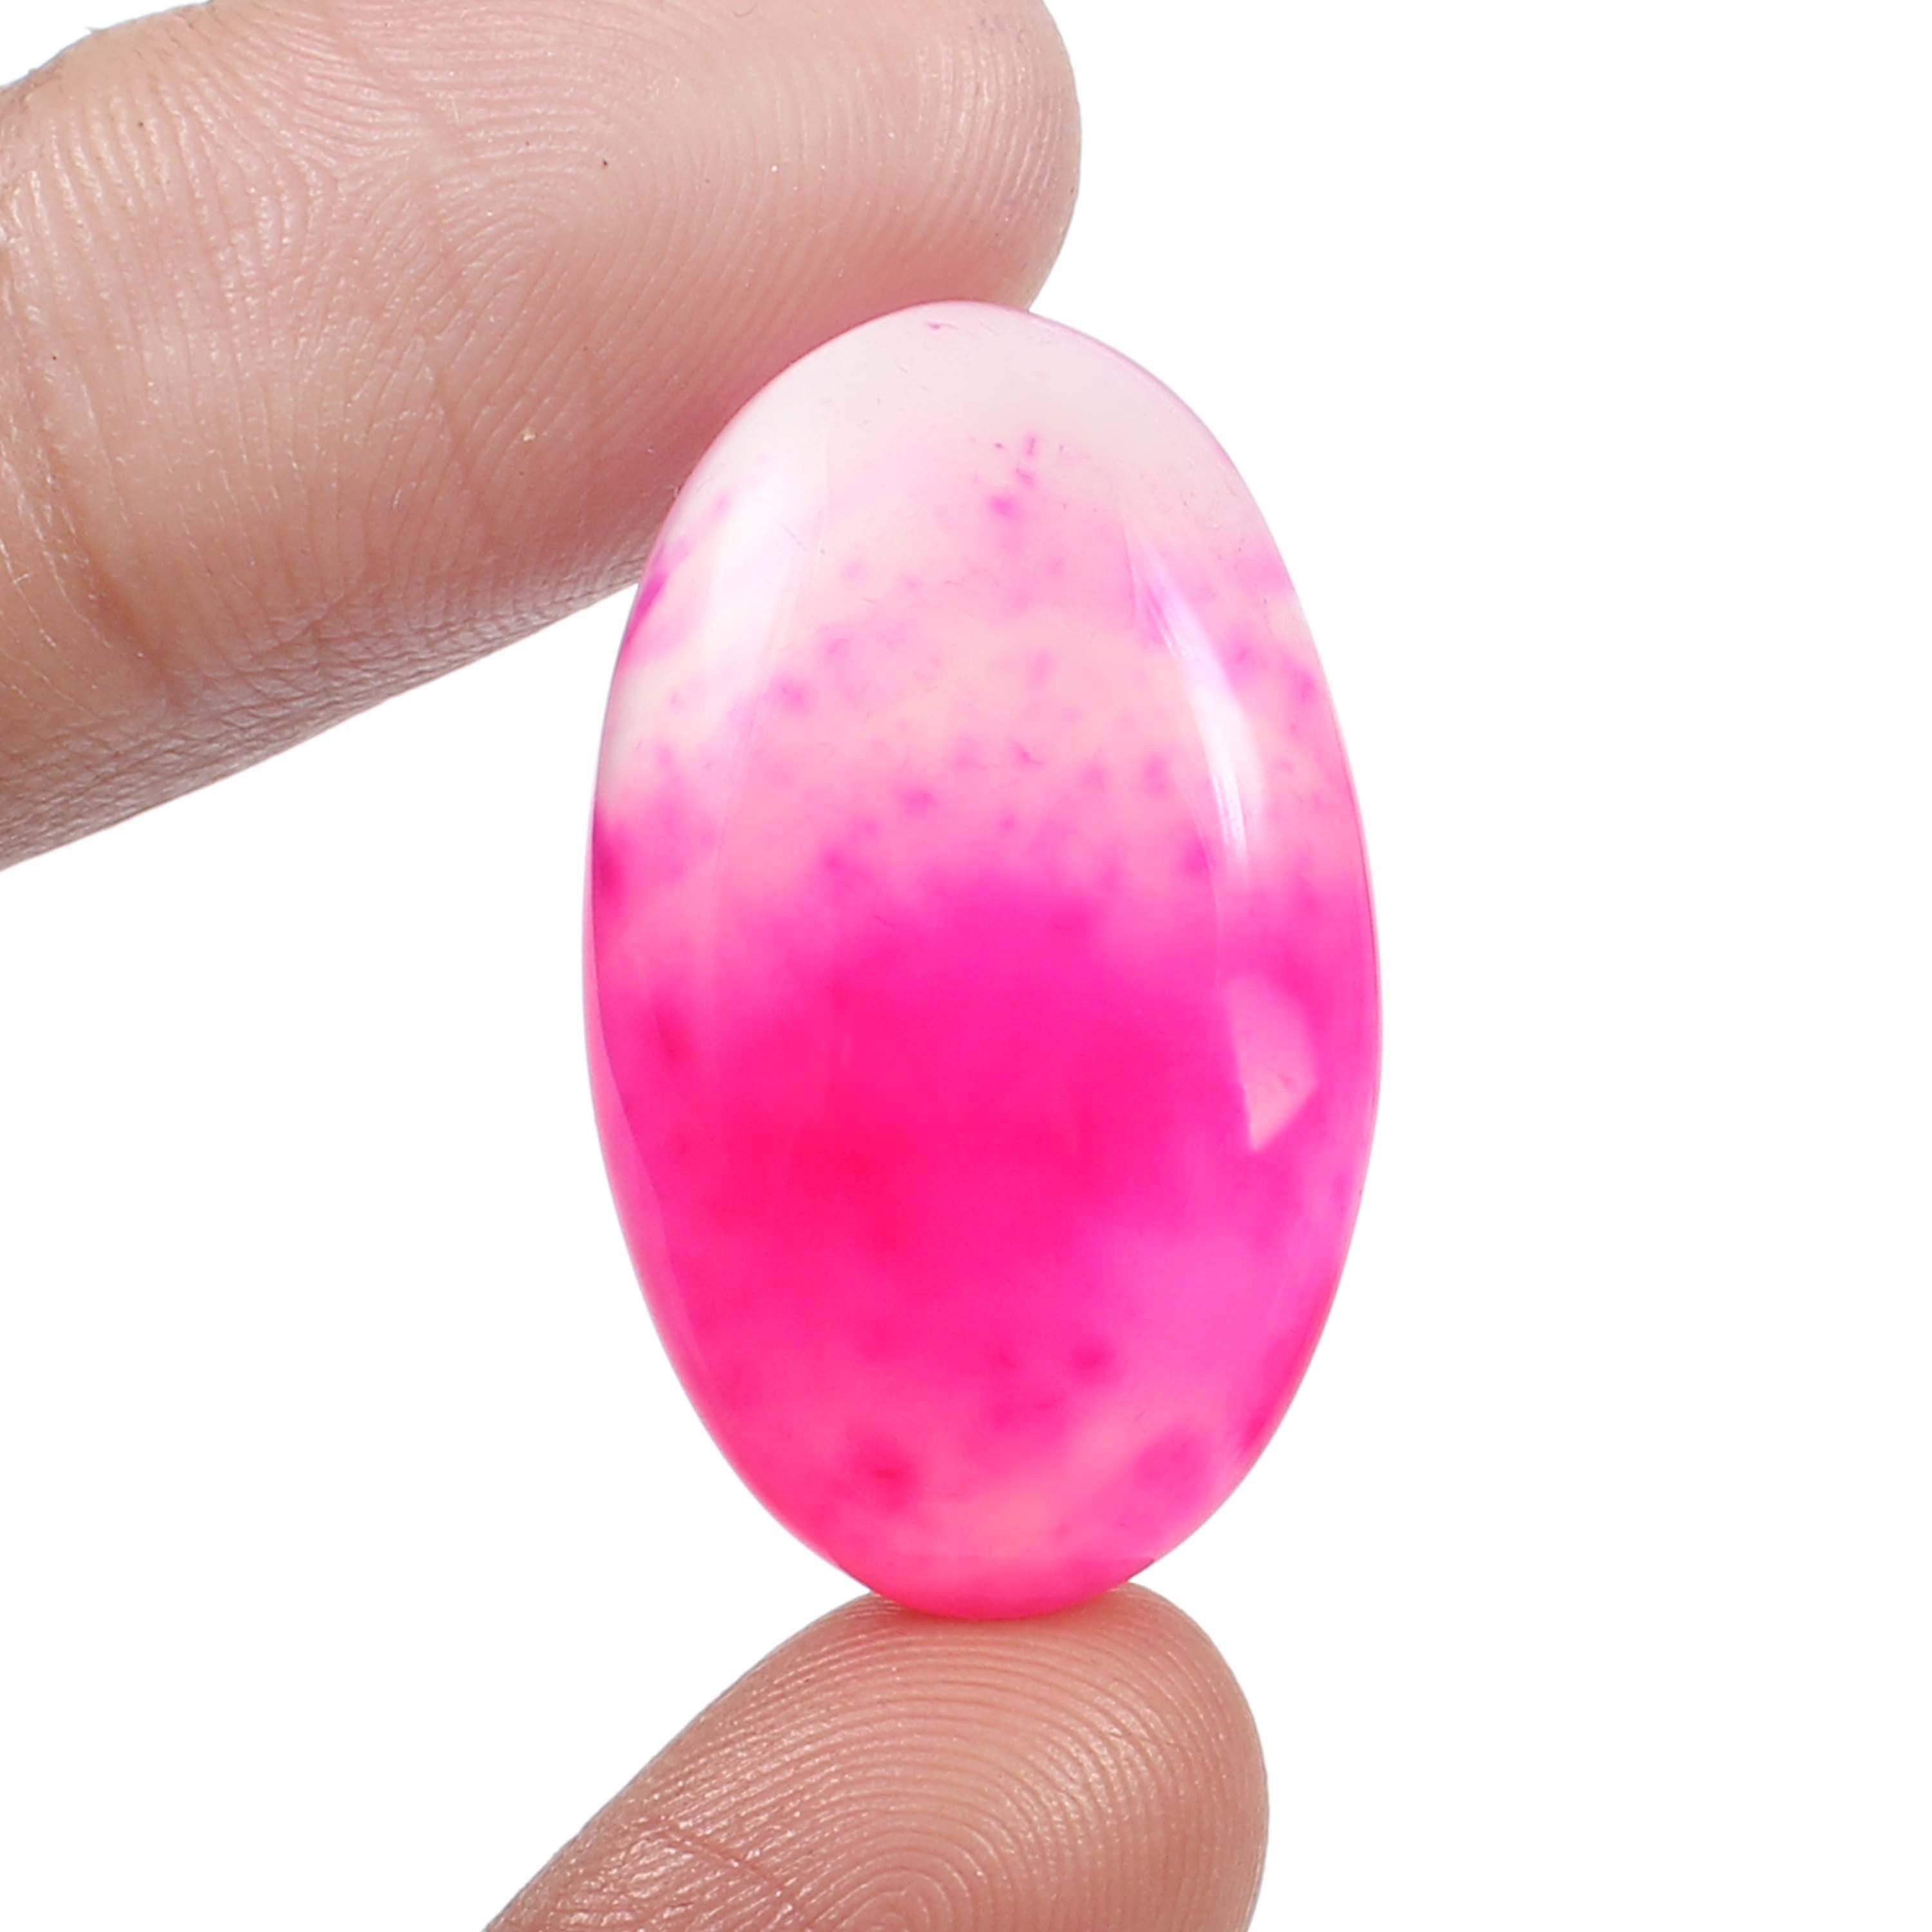 45x31 MM Agate For Pendant OA02 Natural Pink Onyx Agate Cabochon Loose Gemstone For Jewellery Making 61.00 Carat